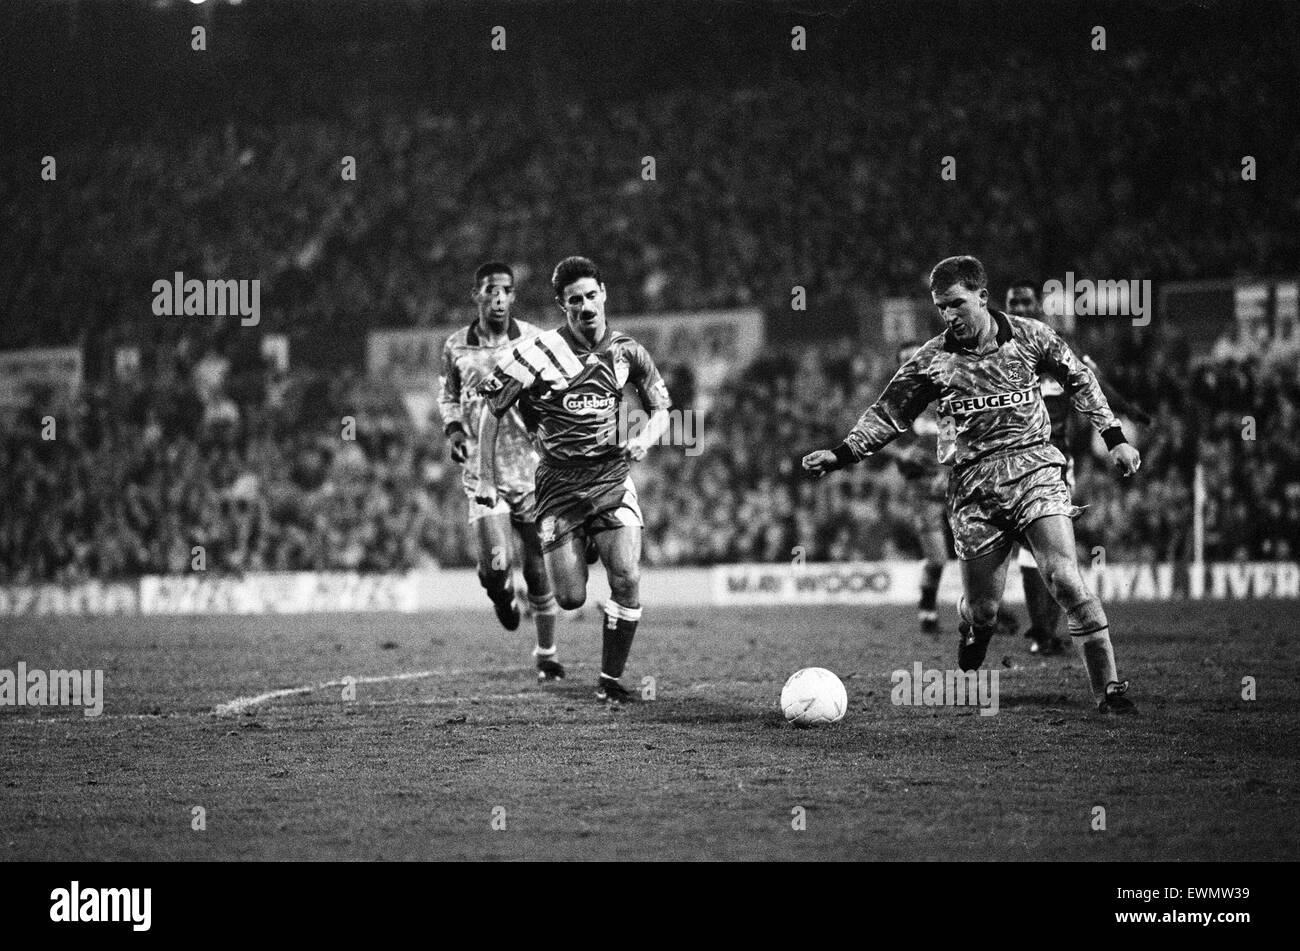 Coventry 5-1 Liverpool, Premier league match at Highfield Road, Saturday 19th December 1992. Ian Rush Stock Photo